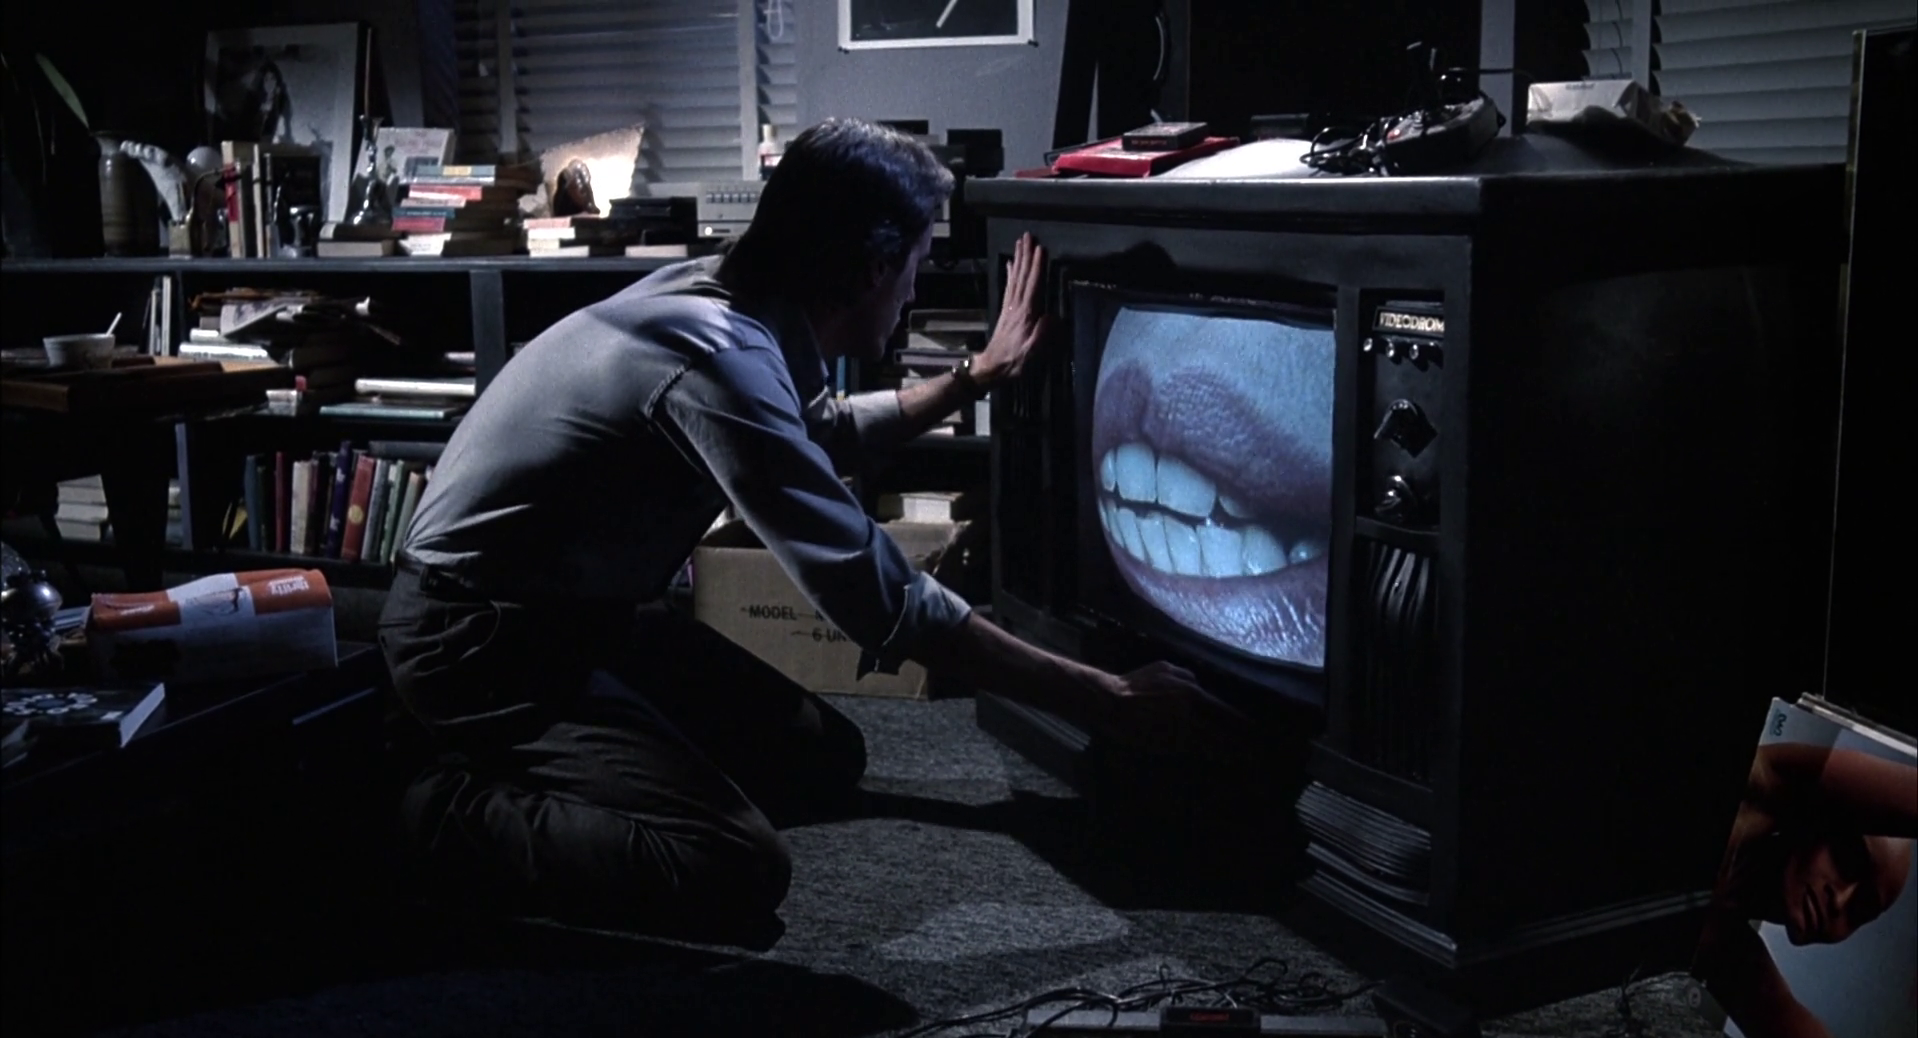 Still from Videodrome. In a dimly lit apartment, Max Kenn kneels in front of a throbbing TV set that he caresses. On the screen is an extreme close-up of a woman's lips speaking to him.